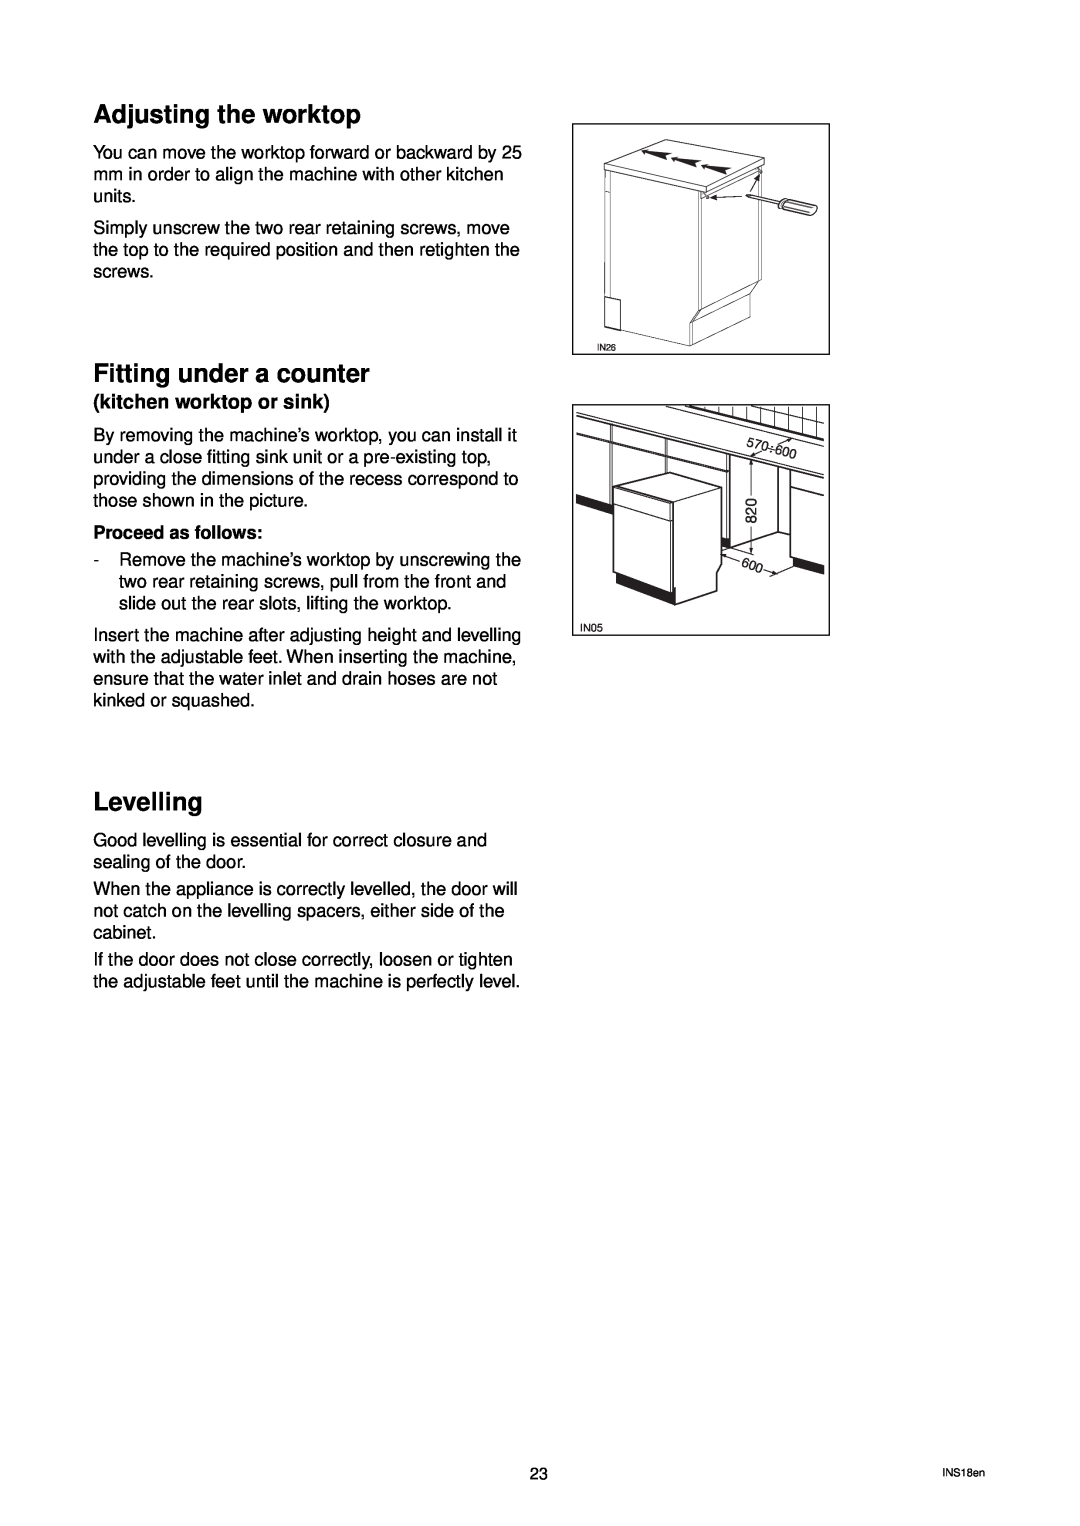 Zanussi DWS 949 manual Adjusting the worktop, Fitting under a counter, Levelling, kitchen worktop or sink 